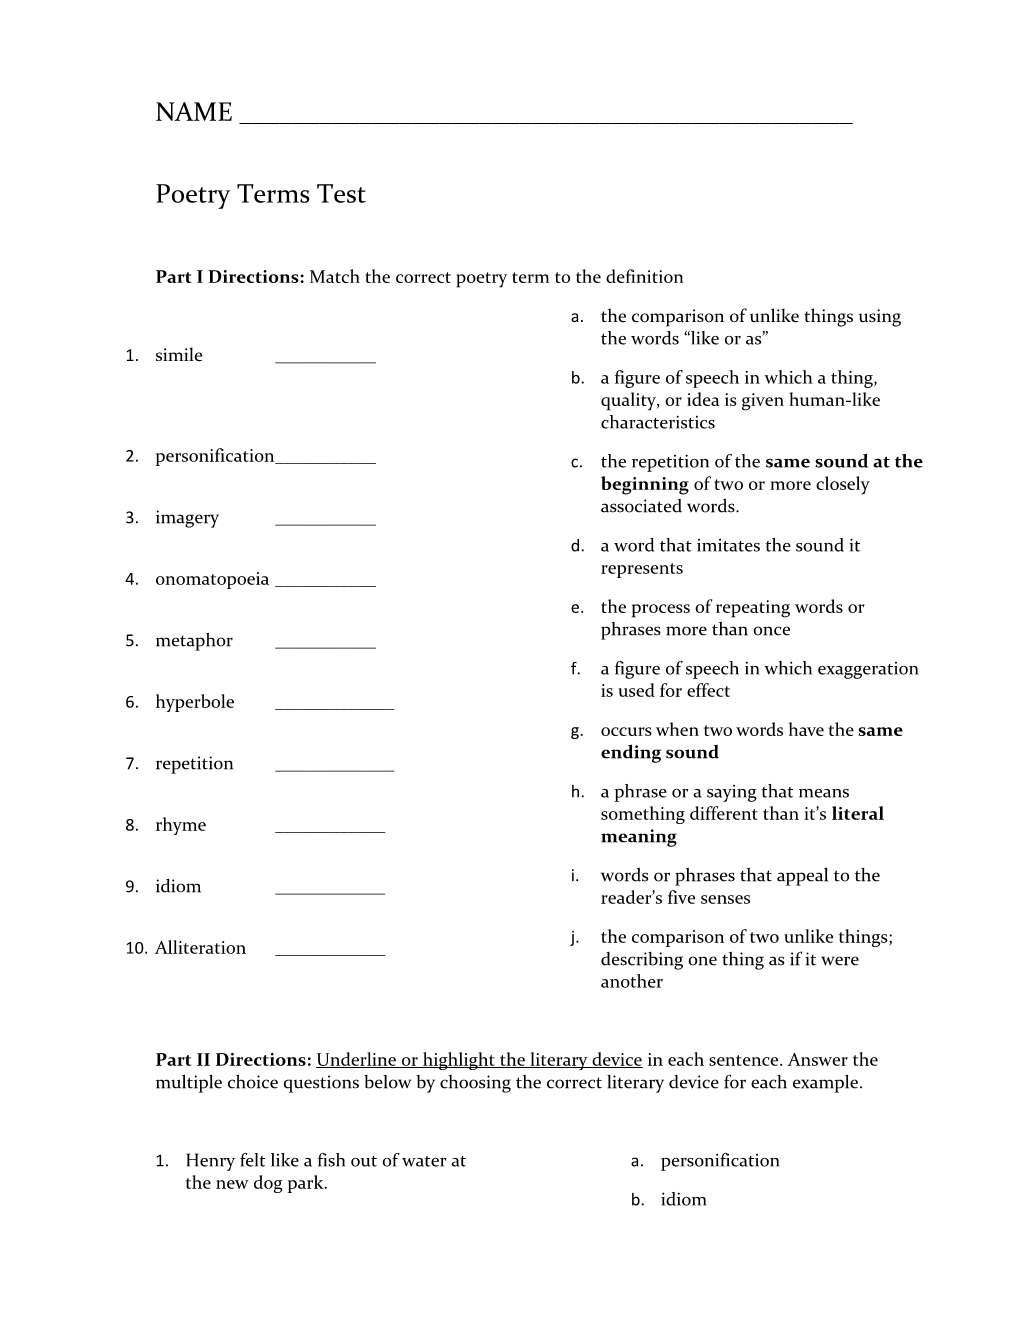 Part I Directions: Match the Correct Poetry Term to the Definition